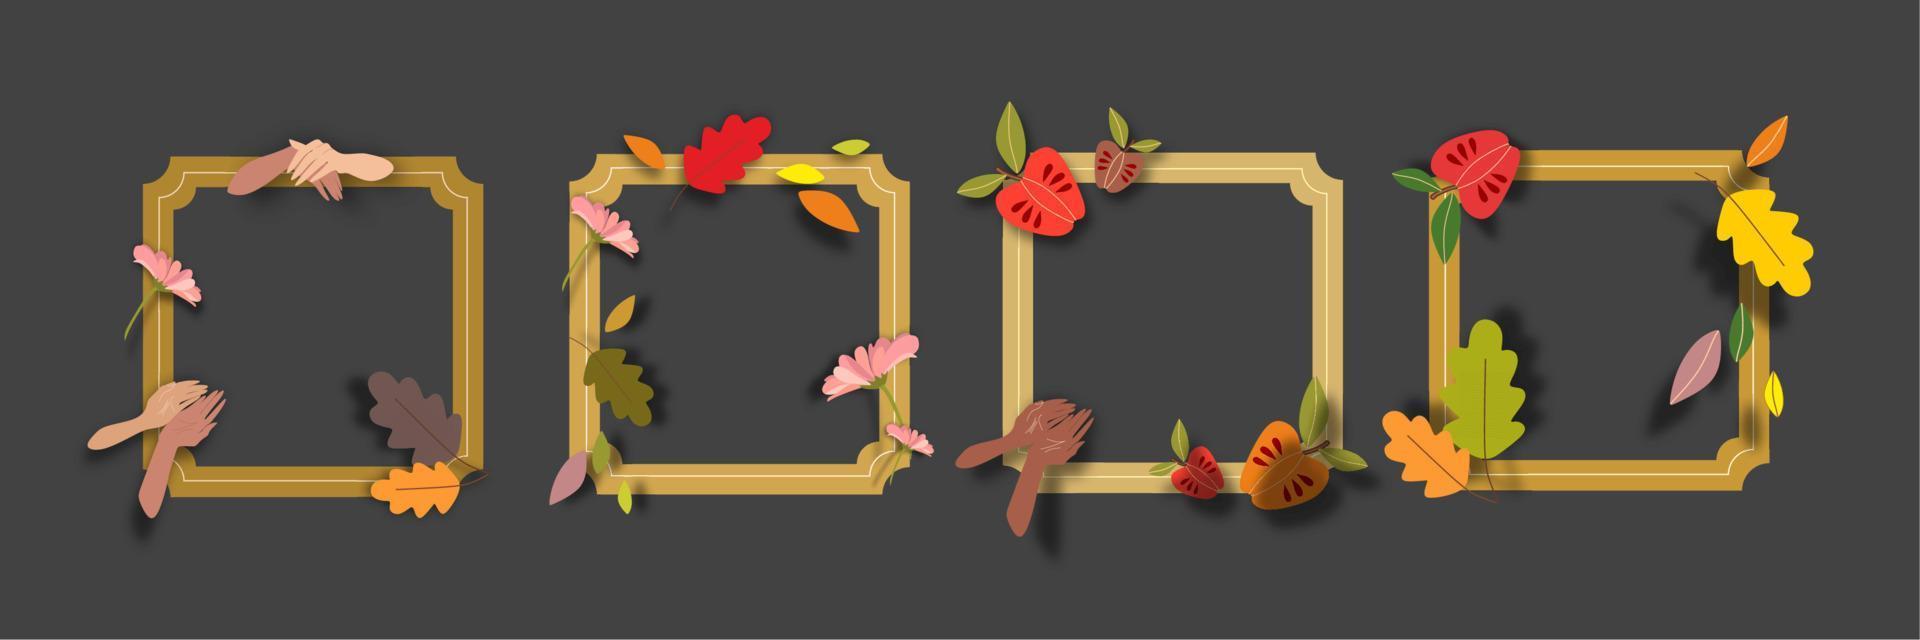 Golden square frames with fruits and foliage. vector